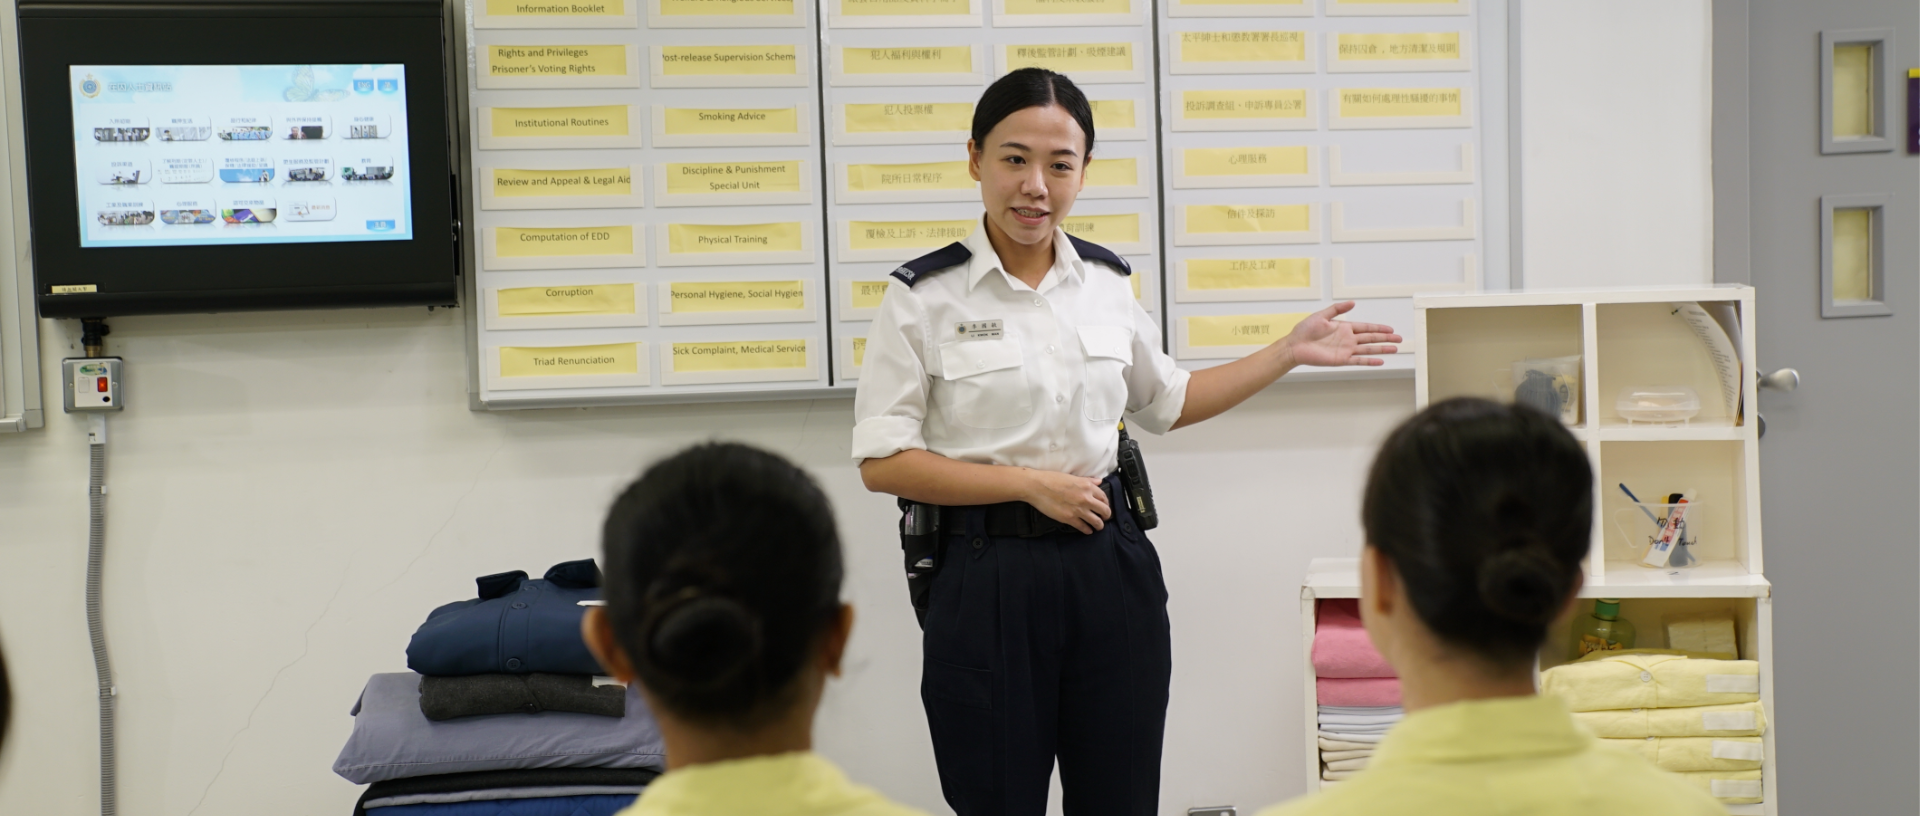  Correctional staff explains institutional rules to persons in custody attending an induction course.